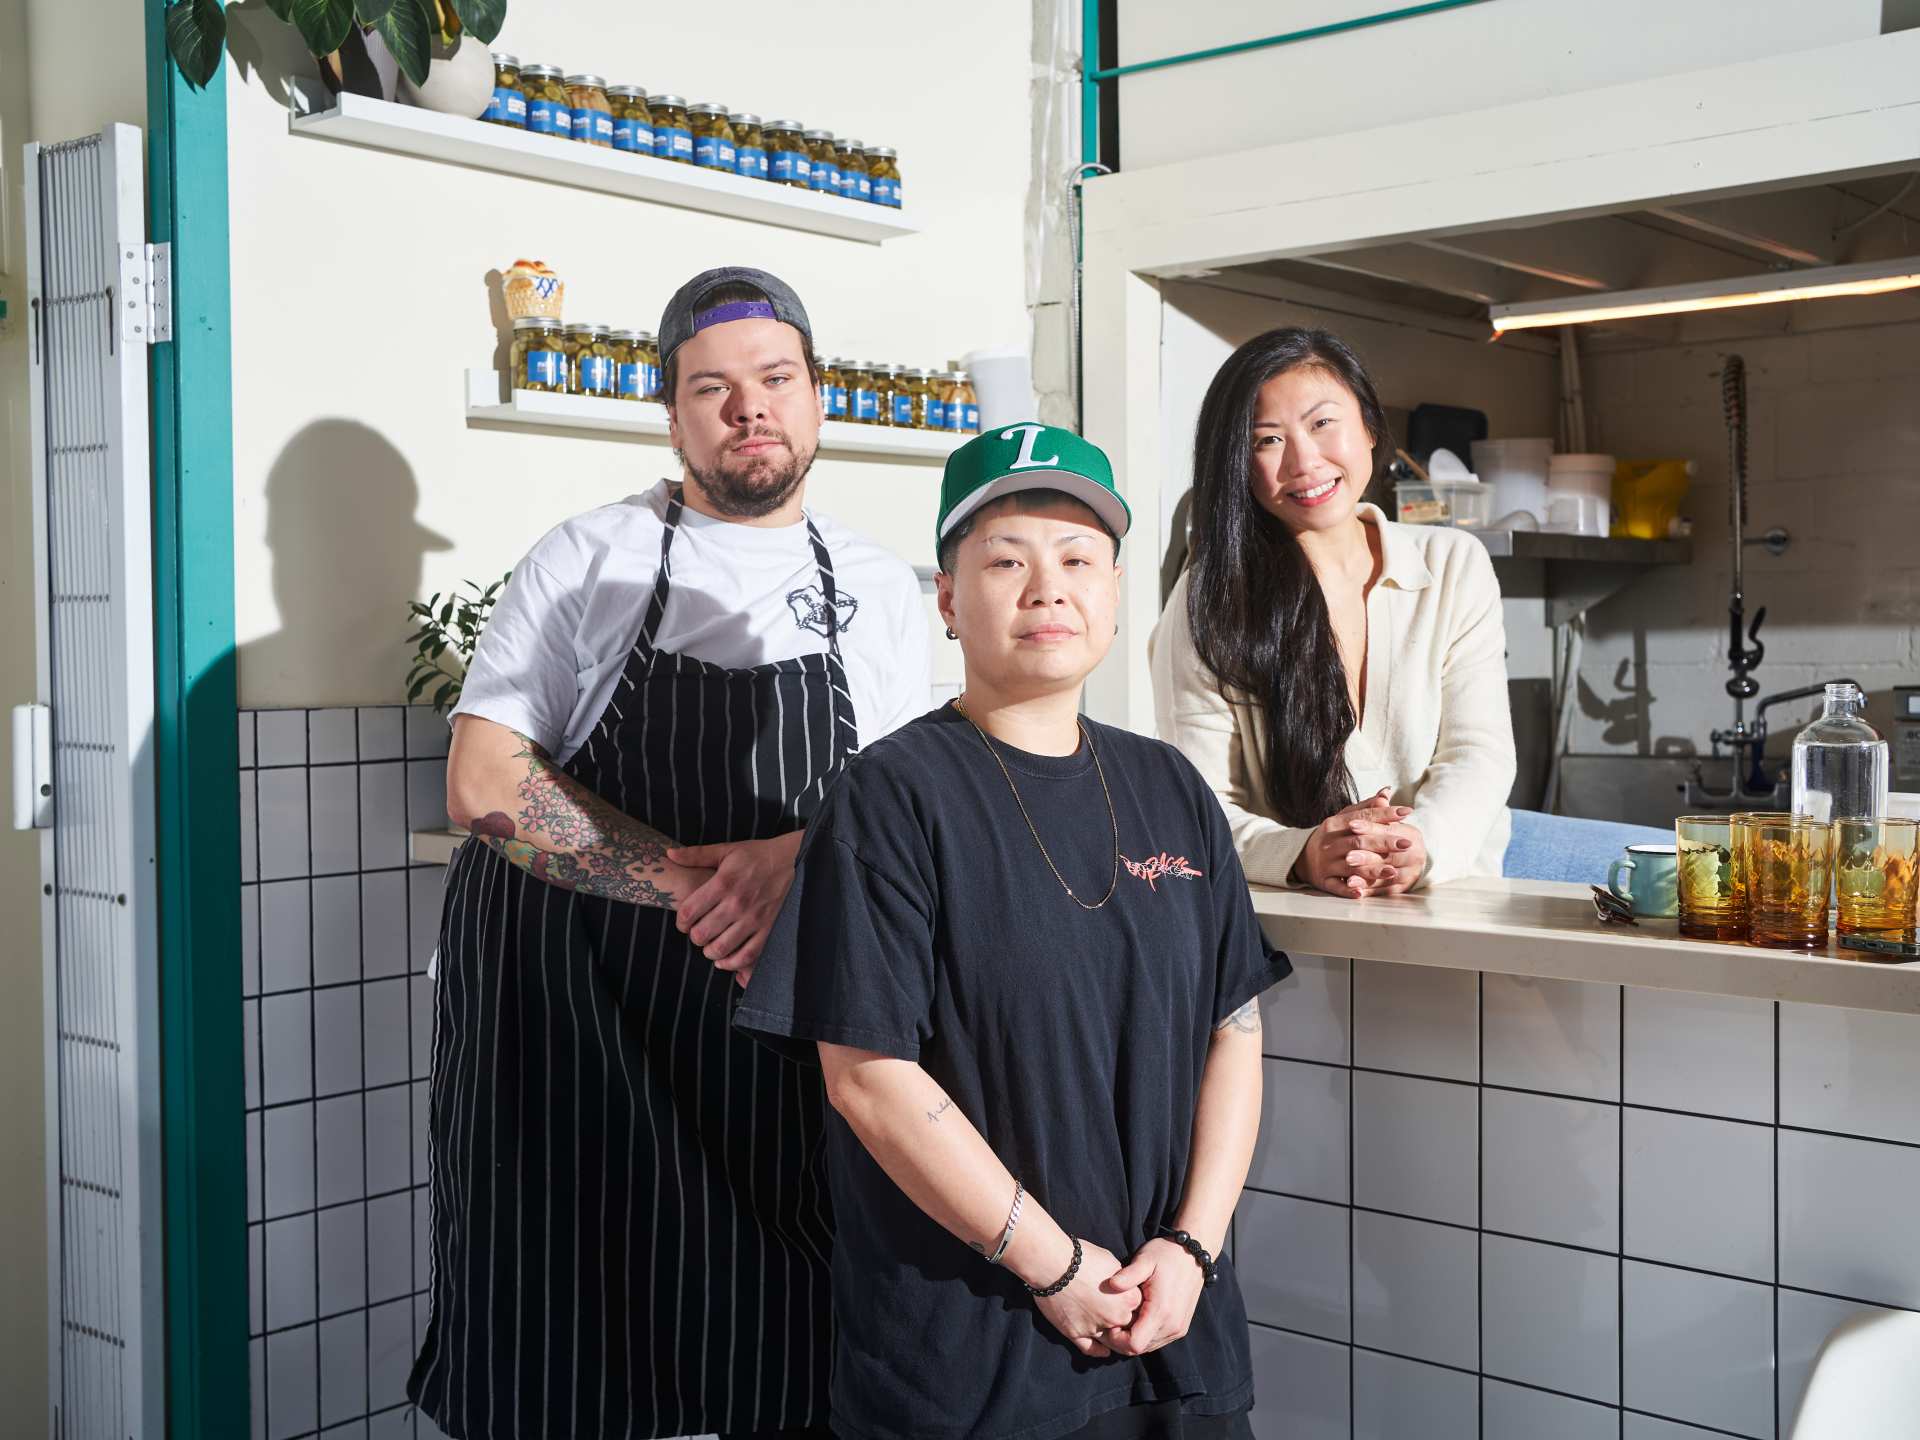 The Simpl Things team: chefs Cody Wilkes and Betty Chia, and owner Evelyn Chick